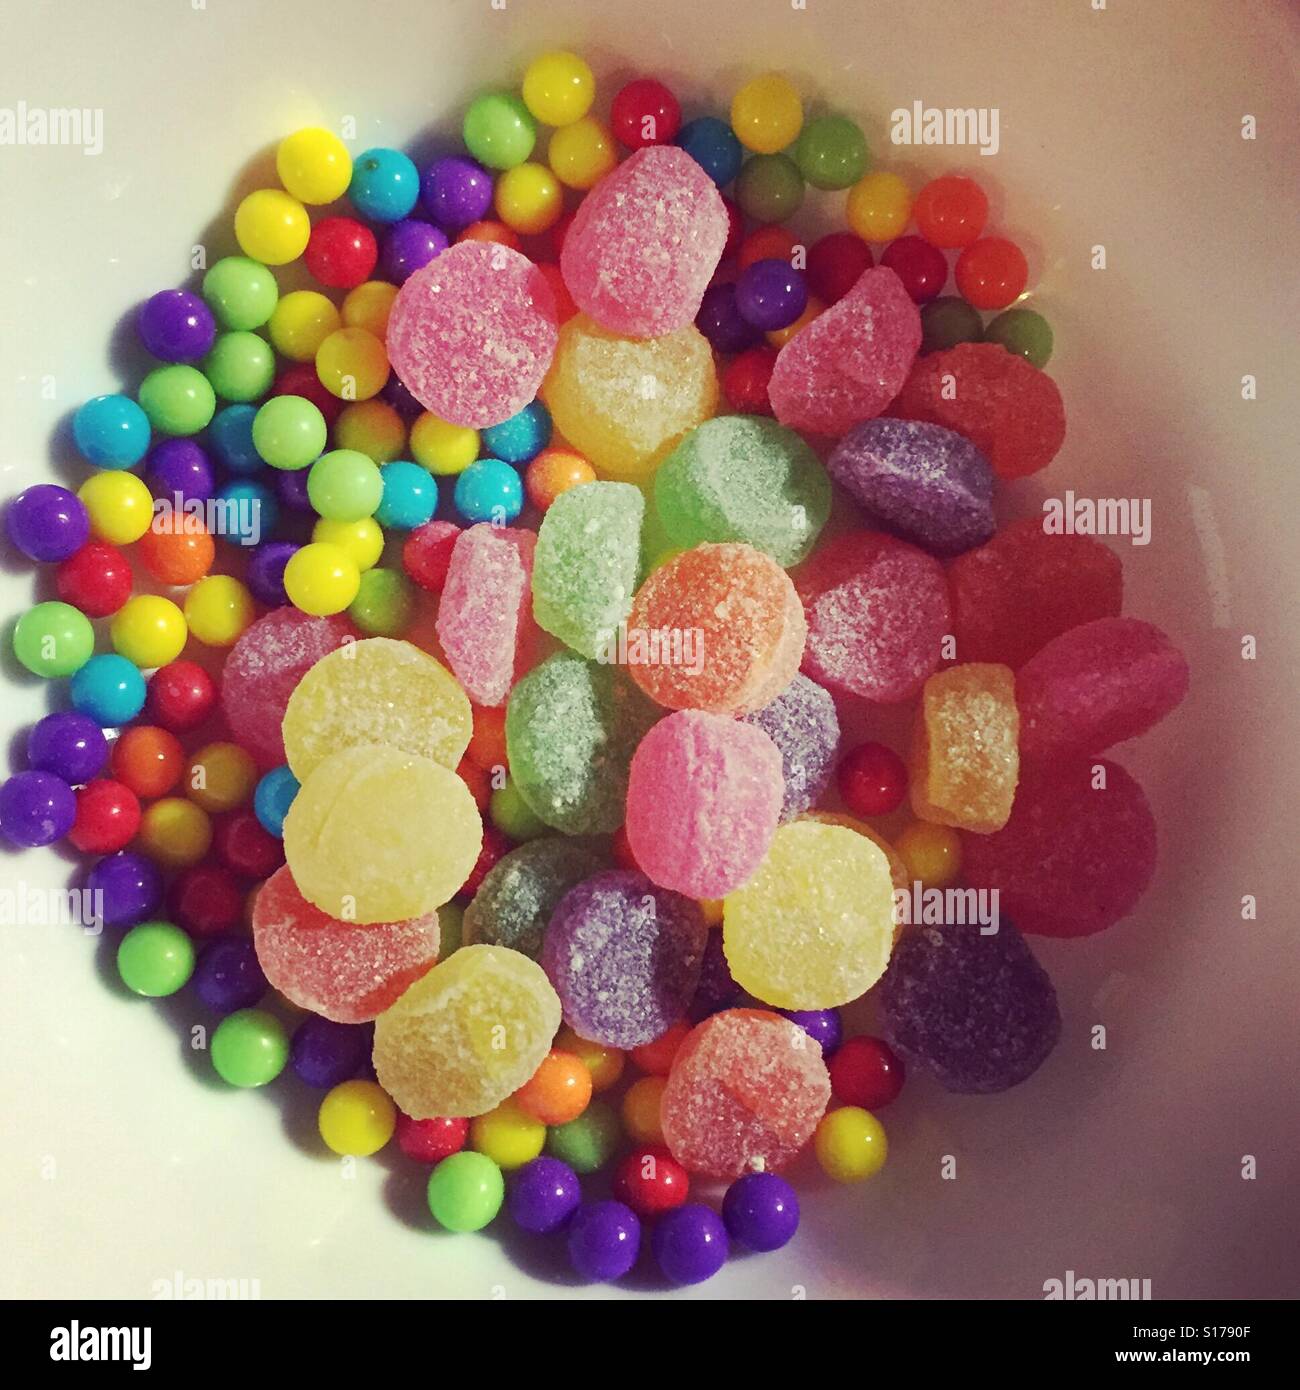 Gummies and sweeties in a bowl by K.R. Stock Photo